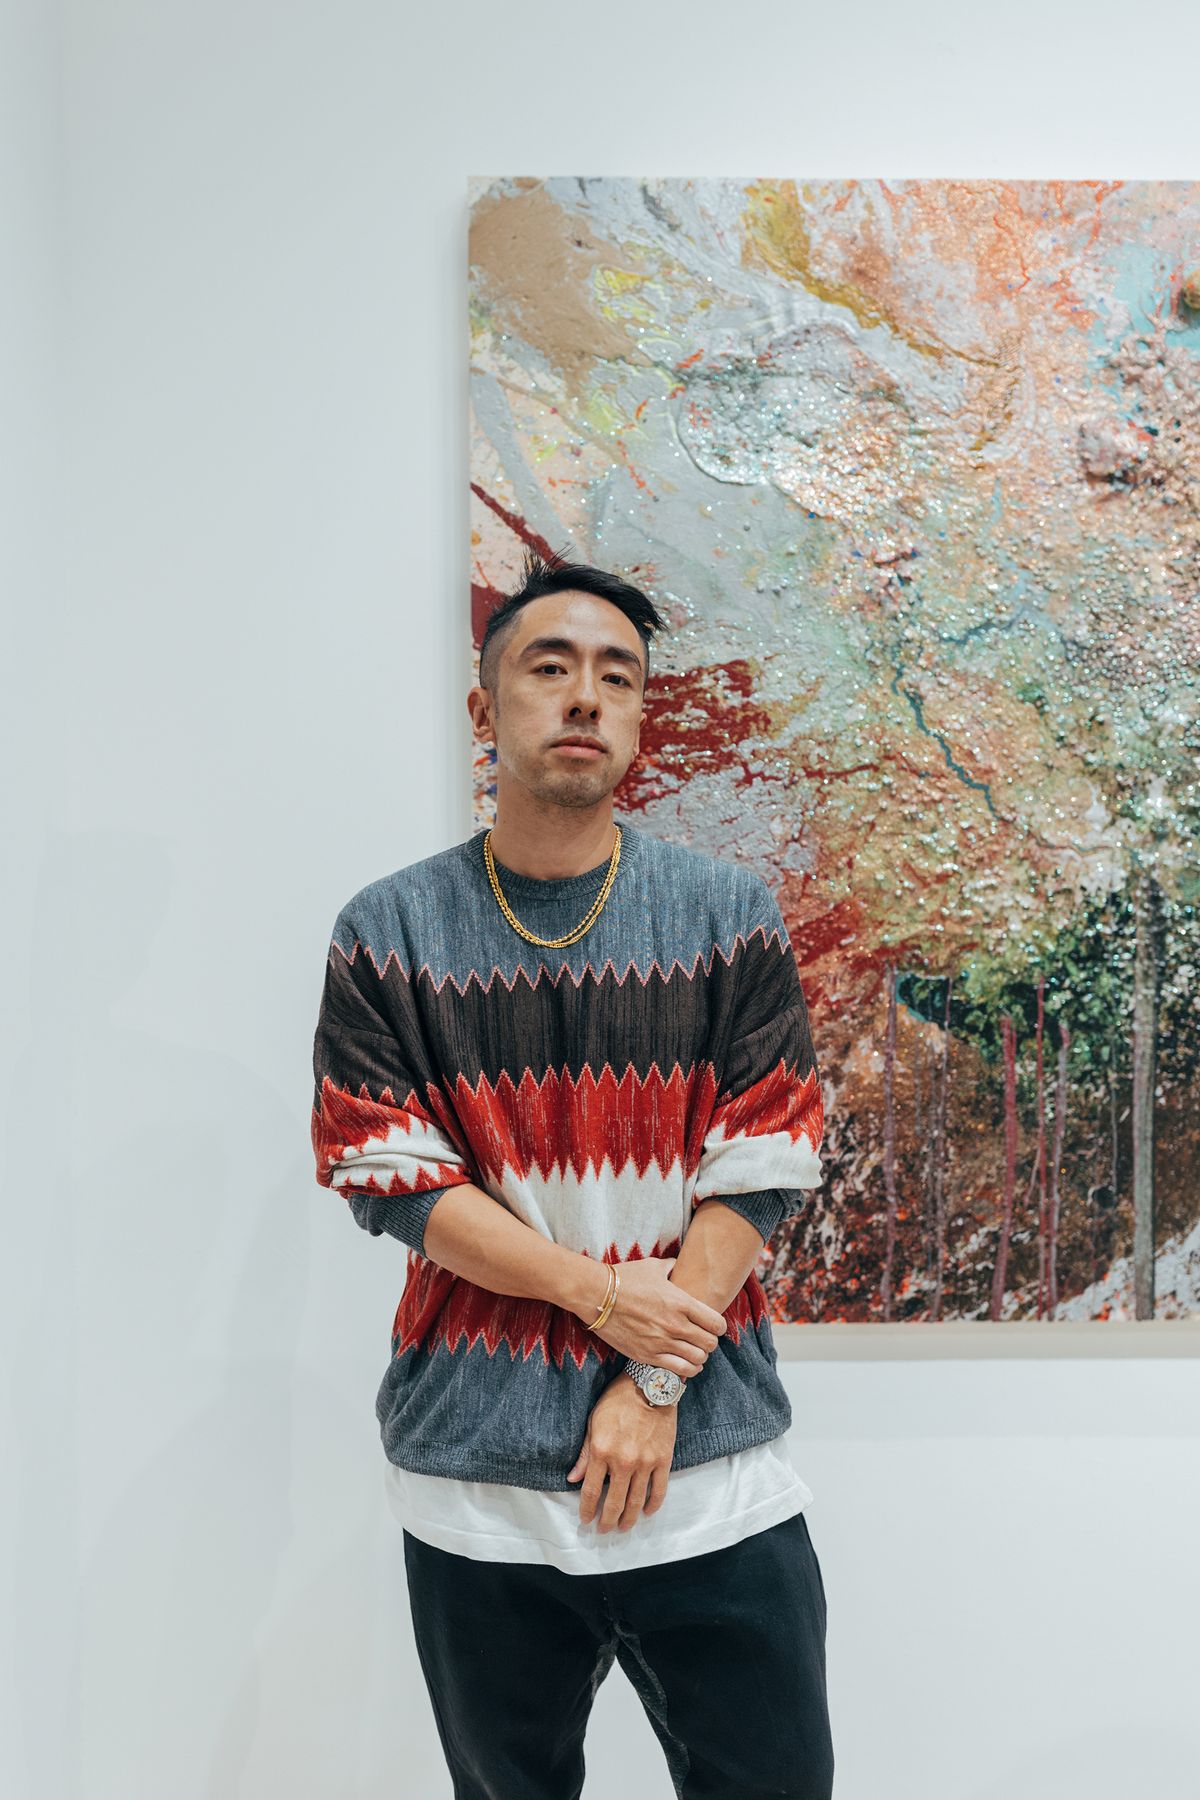 Gallerist and influencer Kevin Poon 

Courtesy of WOAW gallery